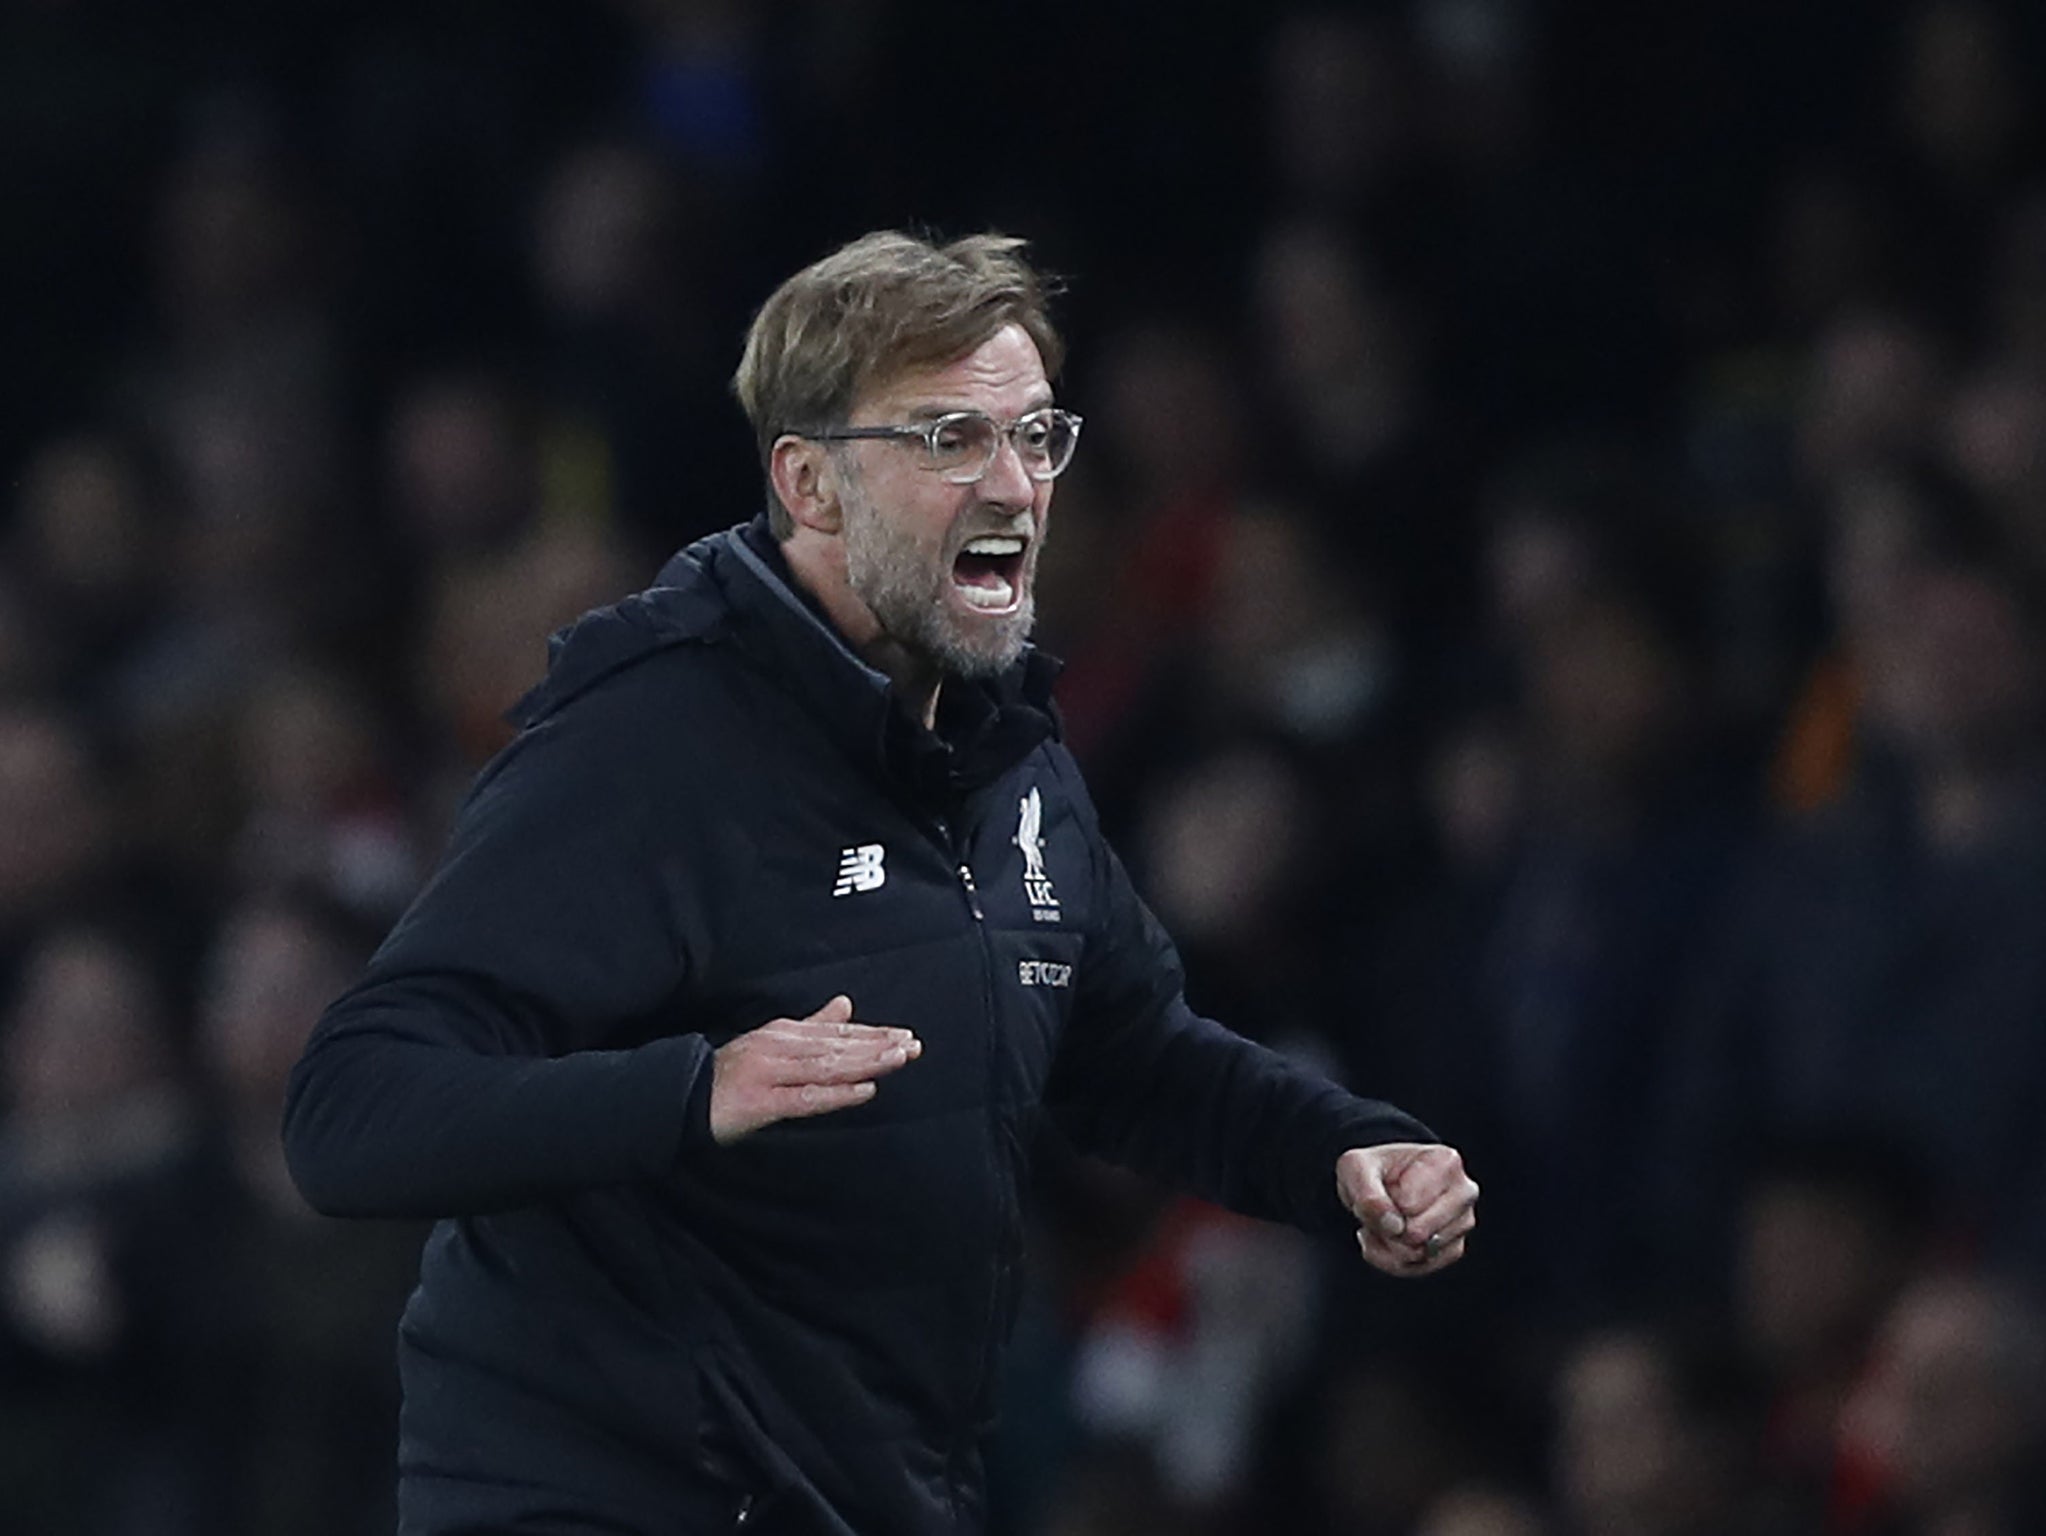 Liverpool conceded three goals in just five-minutes